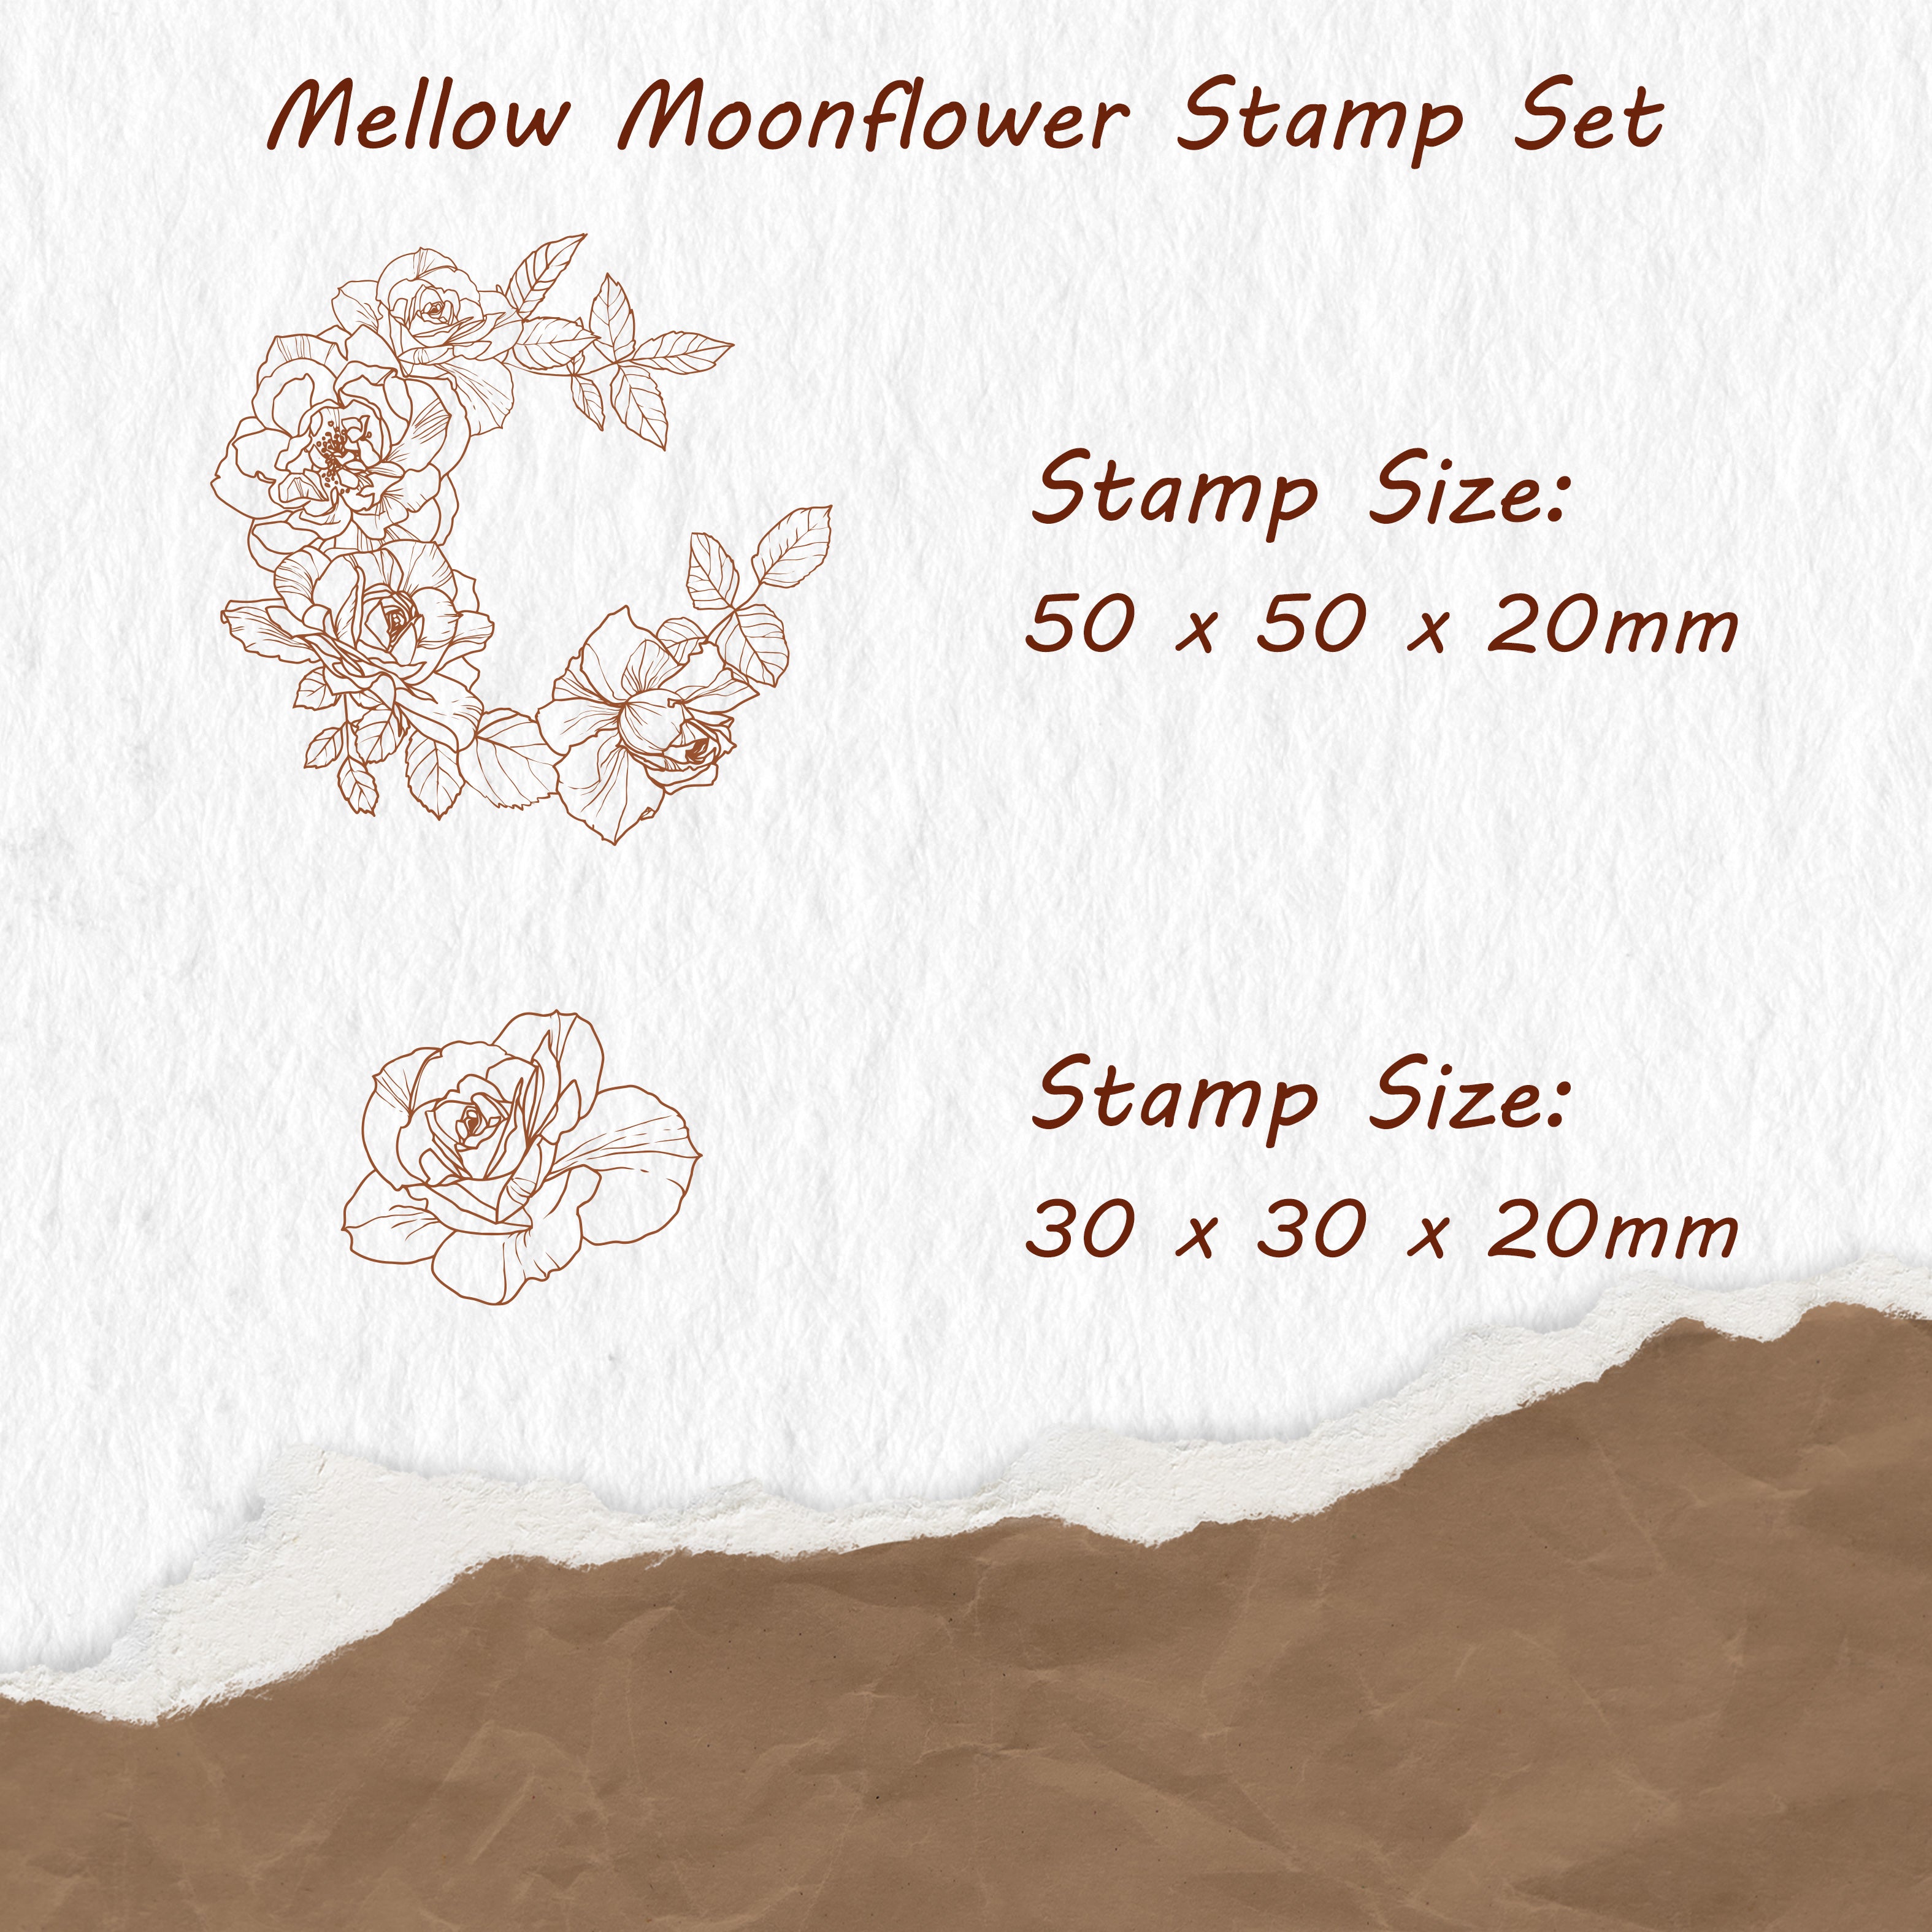 Mellow Moonflower Stamp Set | The Washi Tape Shop. Beautiful Washi and Decorative Tape For Bullet Journals, Gift Wrapping, Planner Decoration and DIY Projects